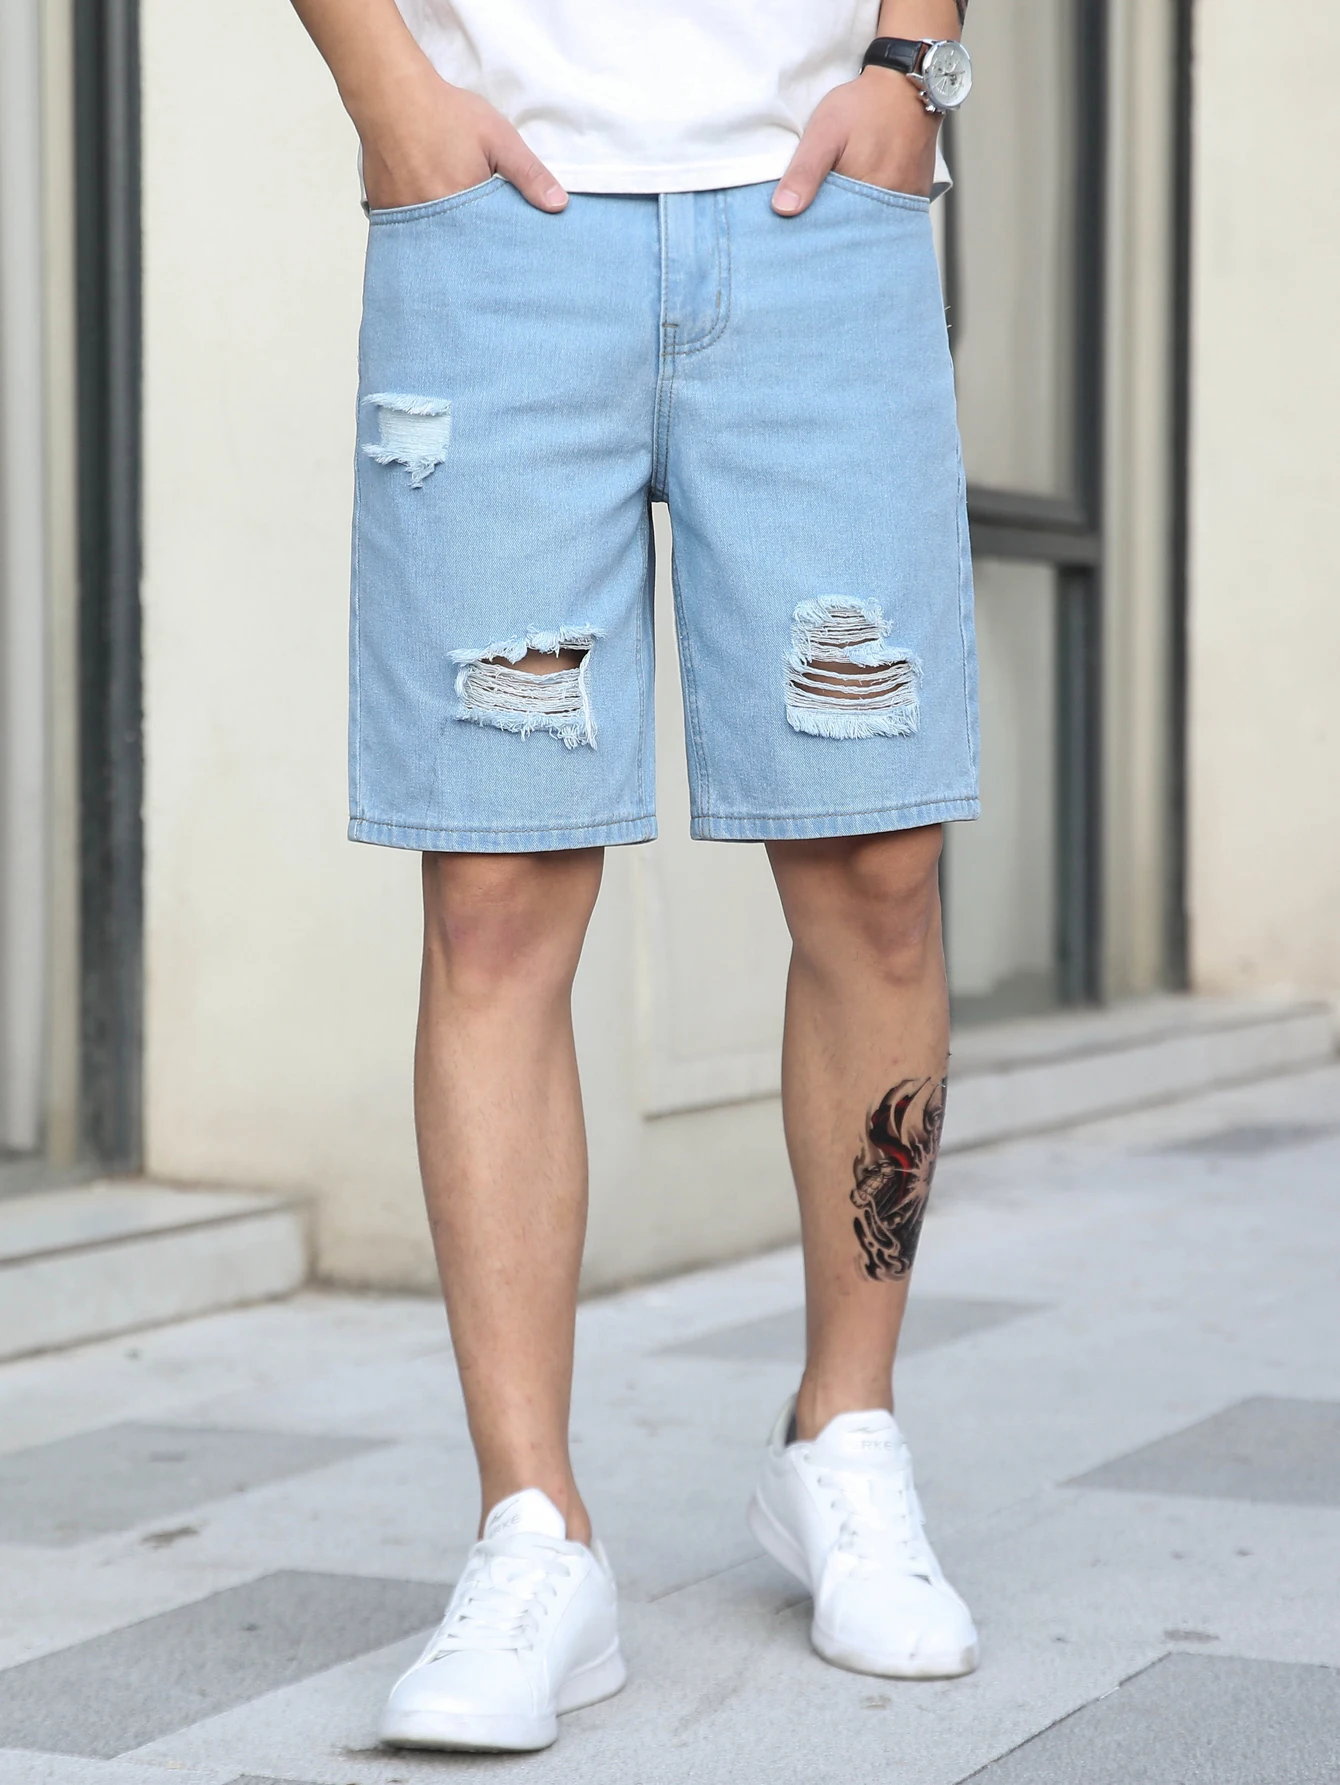 Summer New Men's Stretch Straight Short Jeans Fashion Casual Slim Fit High Quality Elastic Badge Pockets Hole Denim Shorts Male